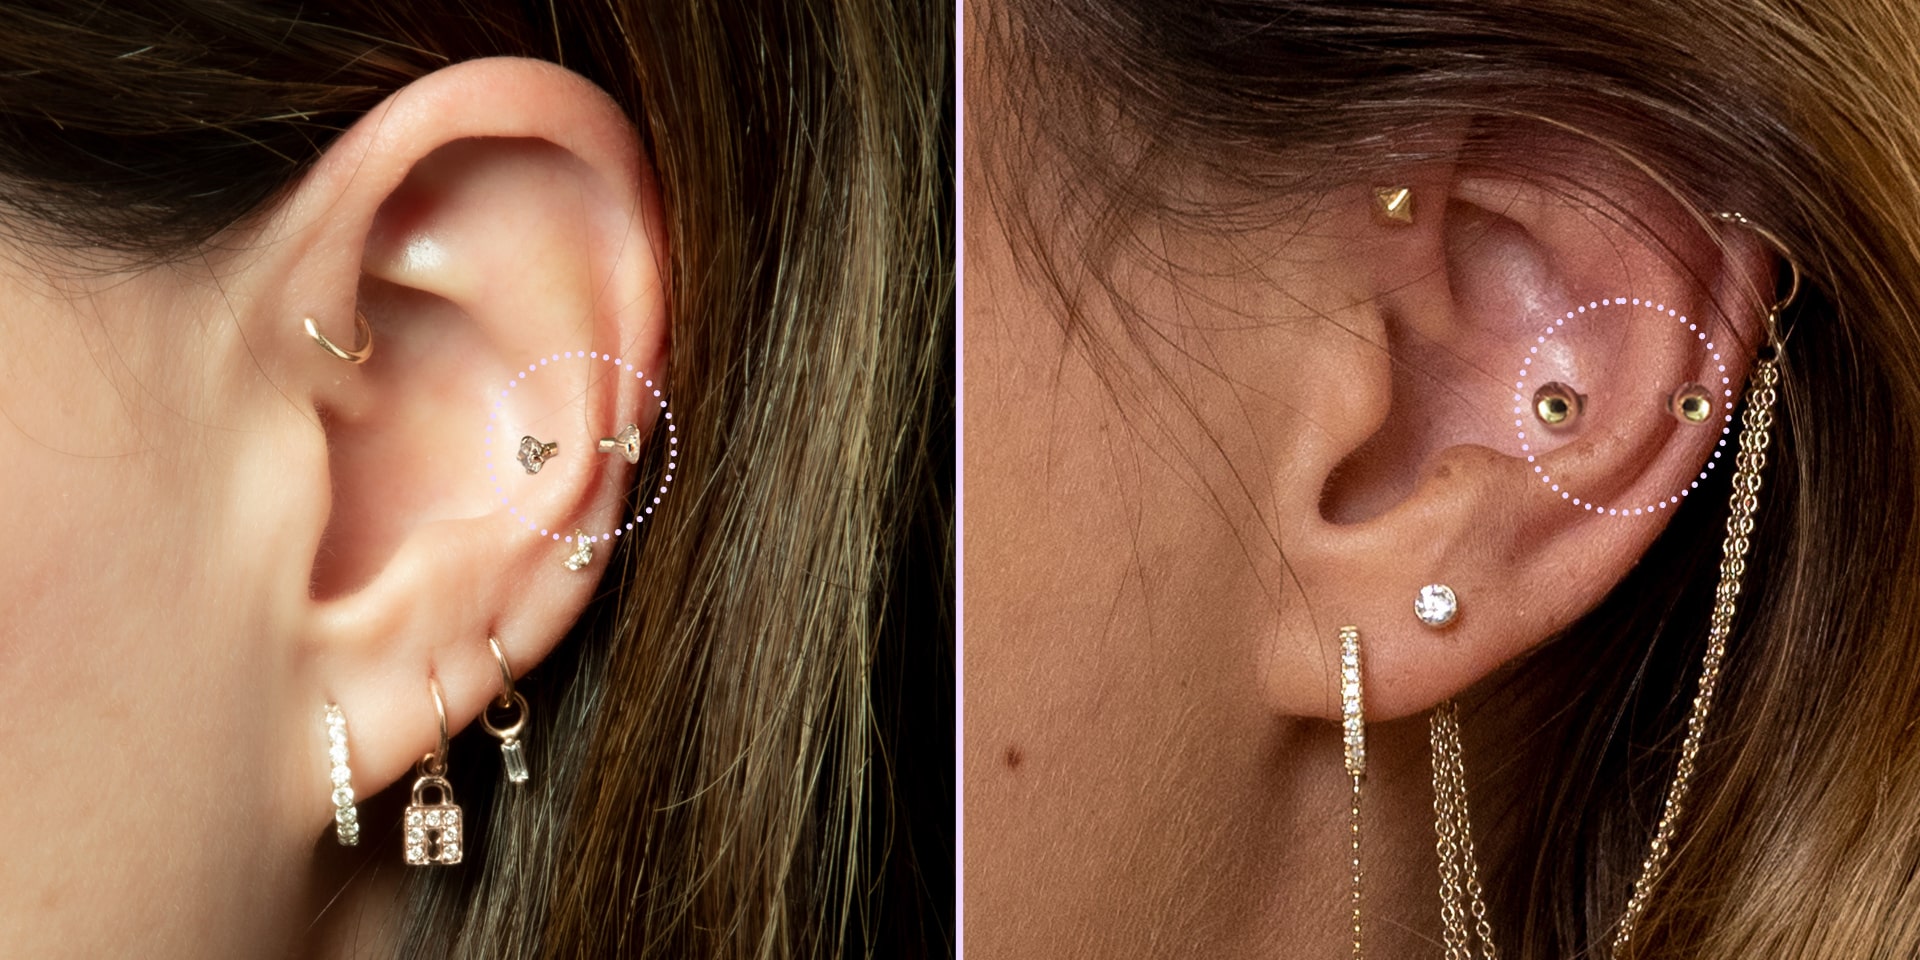 Tragus Piercing Guide: Everything You Need to Know